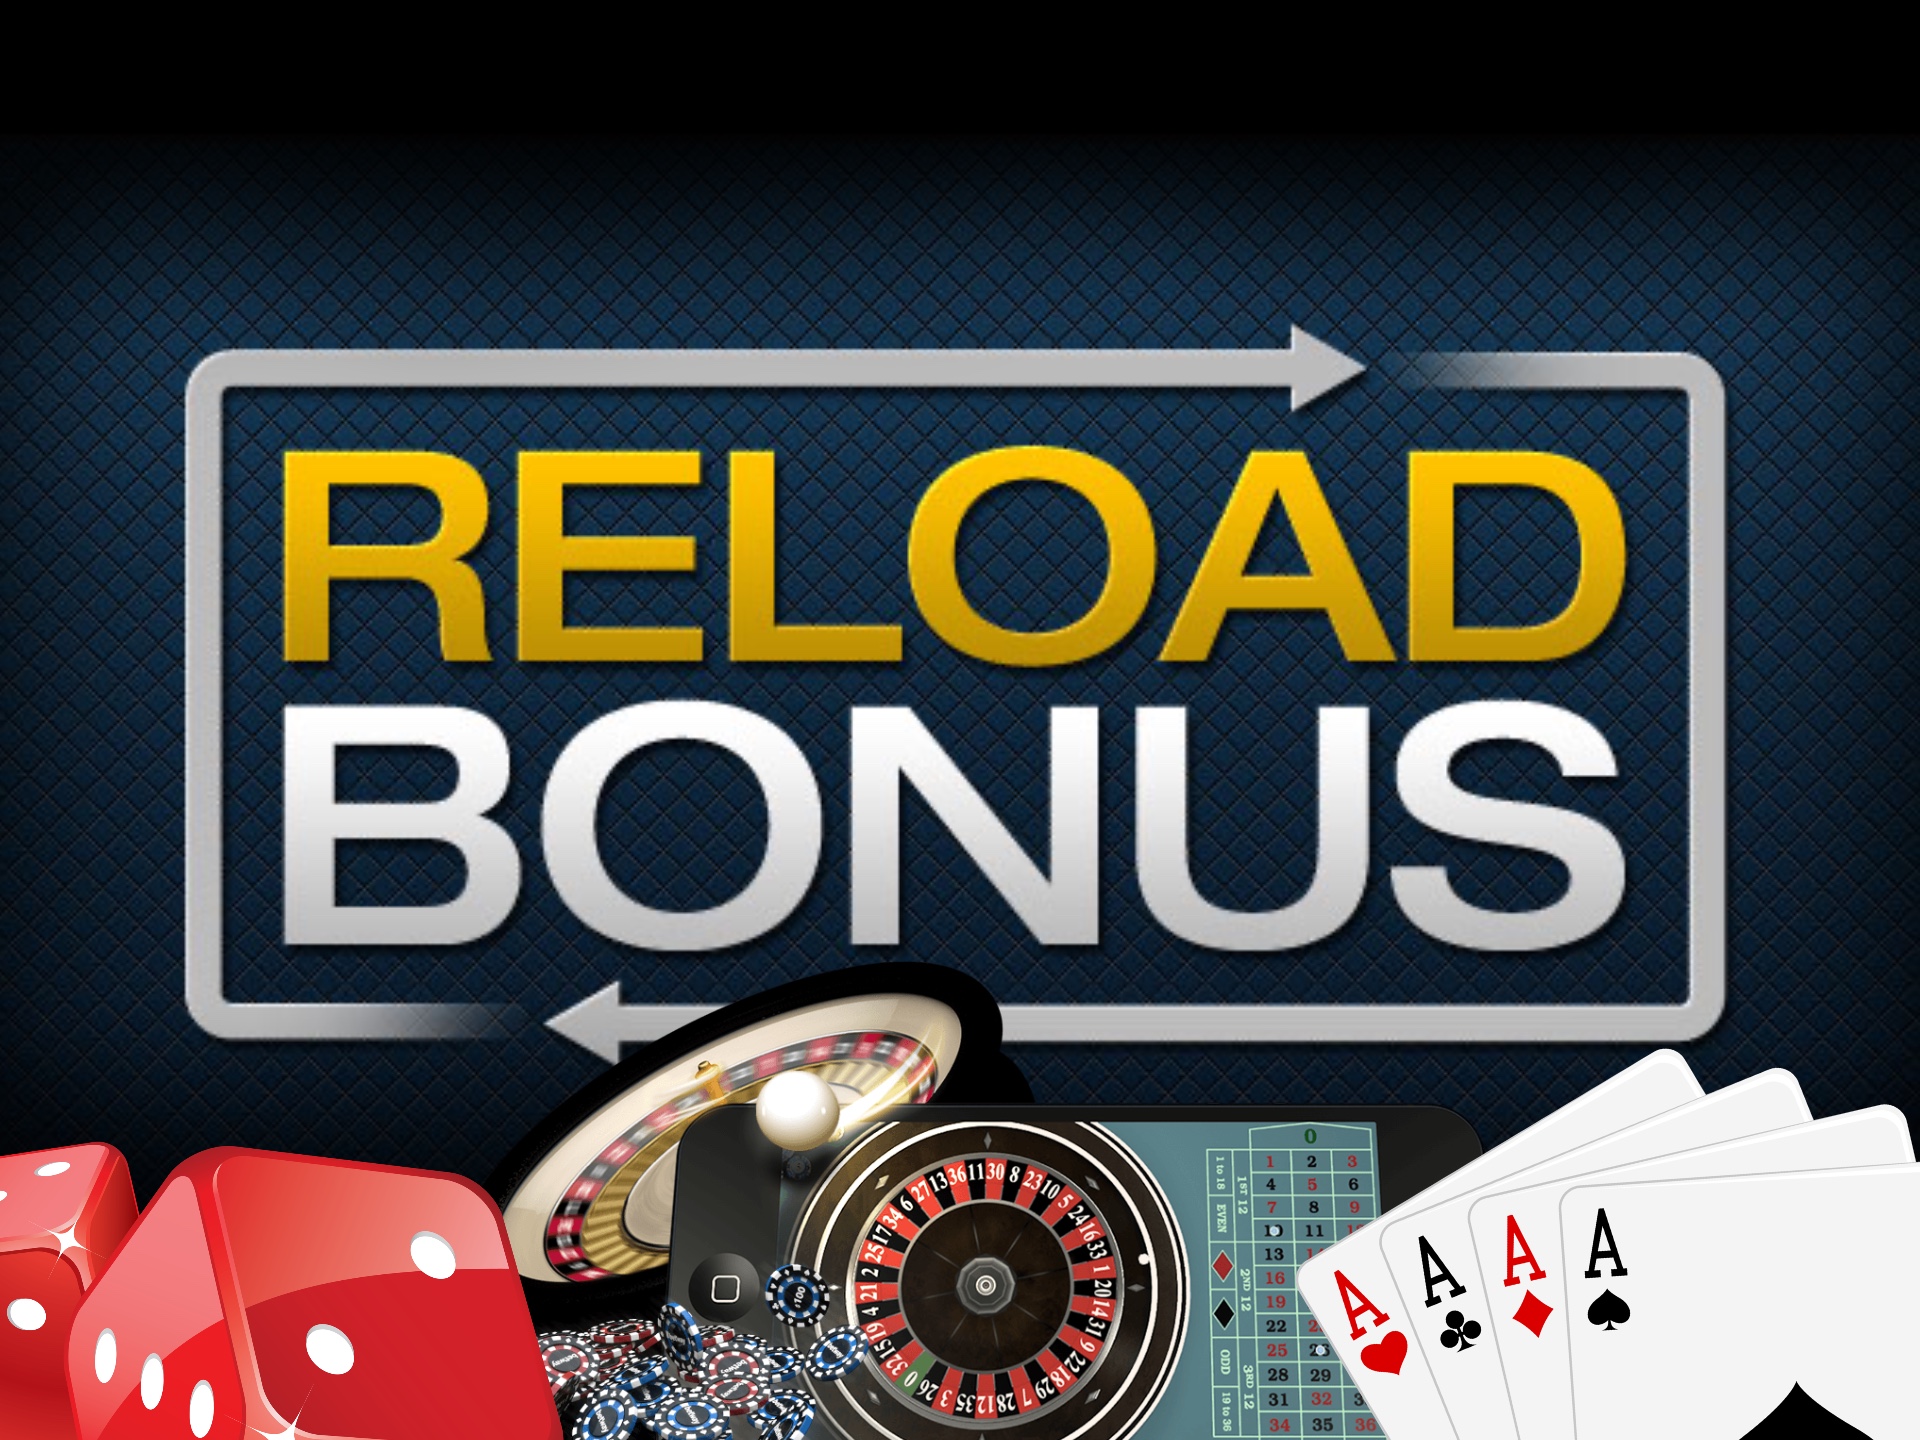 Not a lot of online casinos have a reload bonus, but still it's a great opportunity to make your gambling even more profitable.